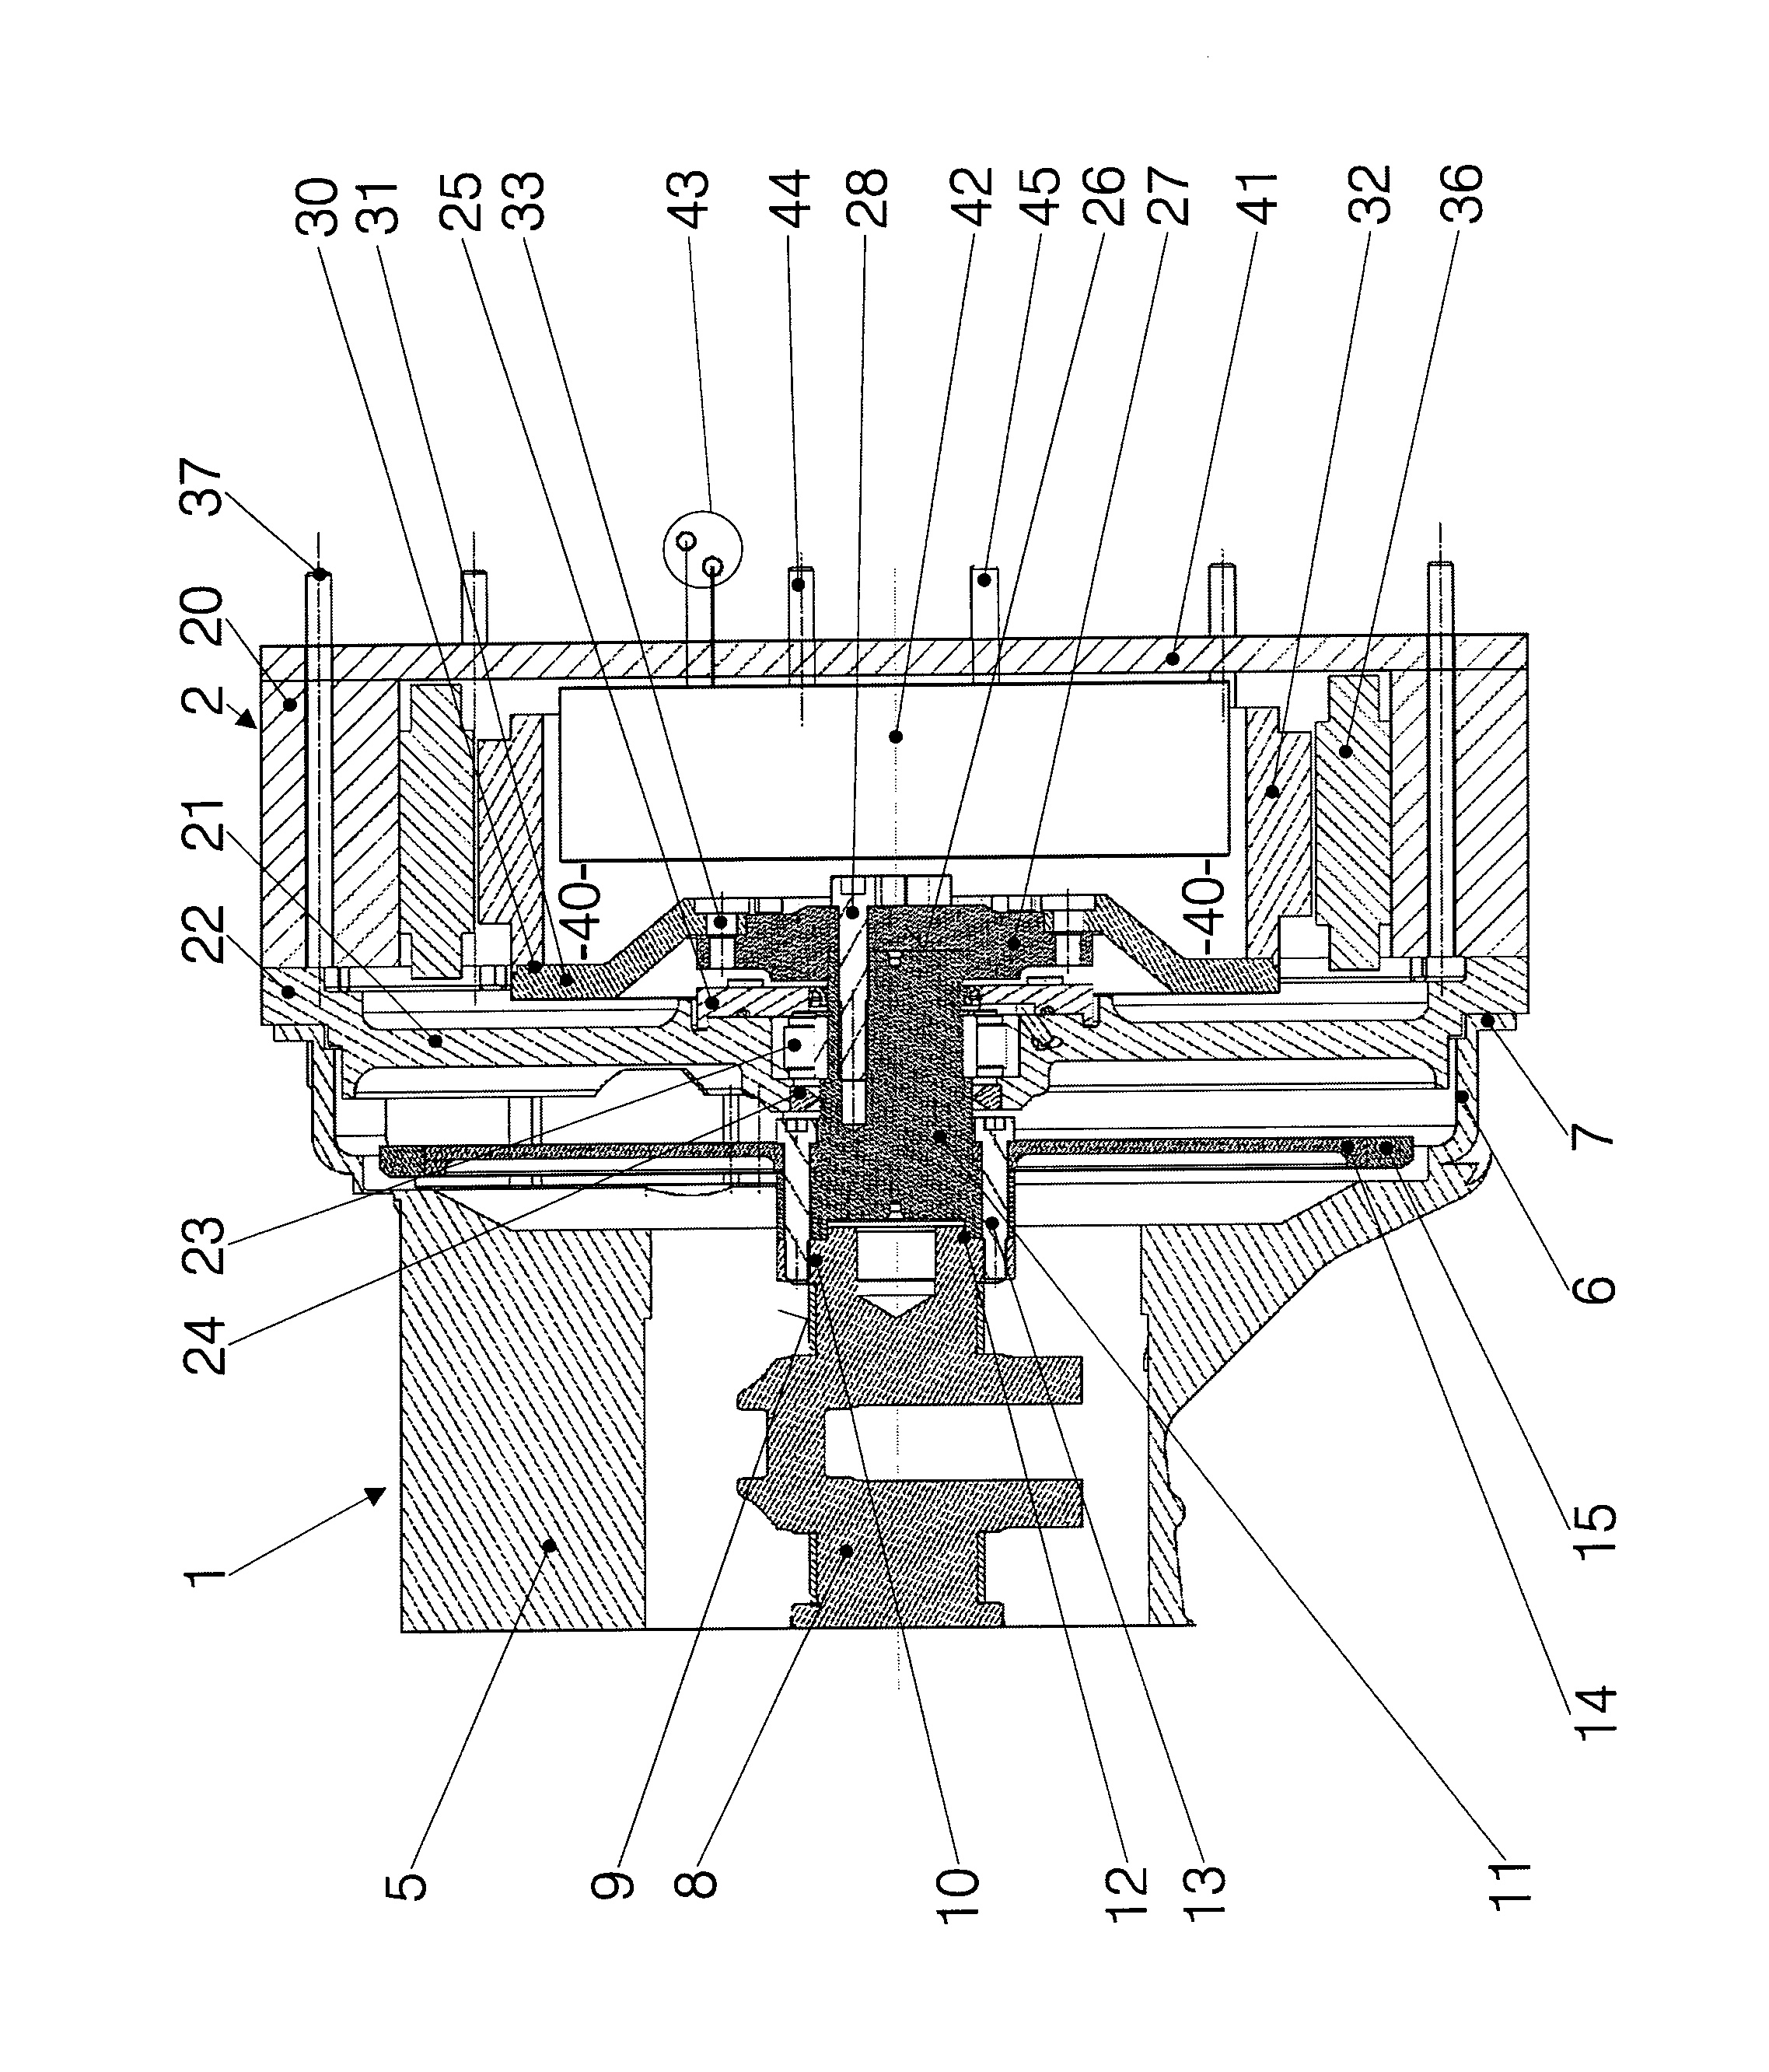 Generating unit comprising a combustion engine and a generator